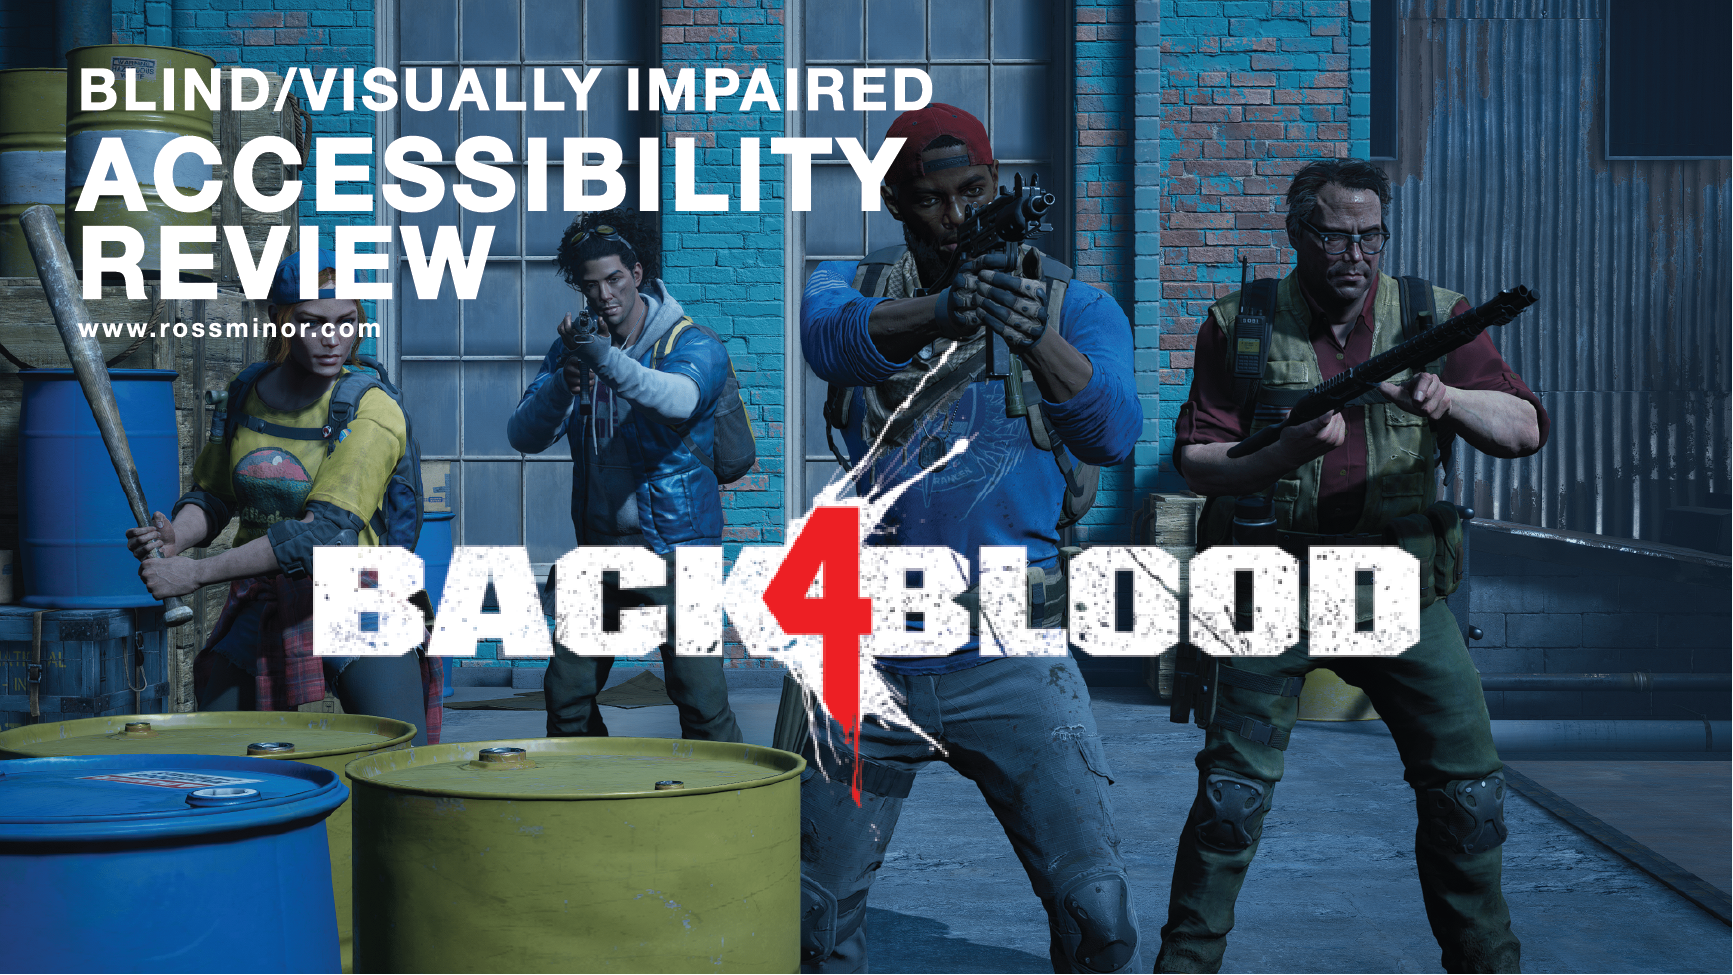 Four characters in Back4Blood stand posted with weapons drawn towards the camera, text reads "Blind/Visually Impaired Accessibility review, Back4Blood, RossMinor.com."